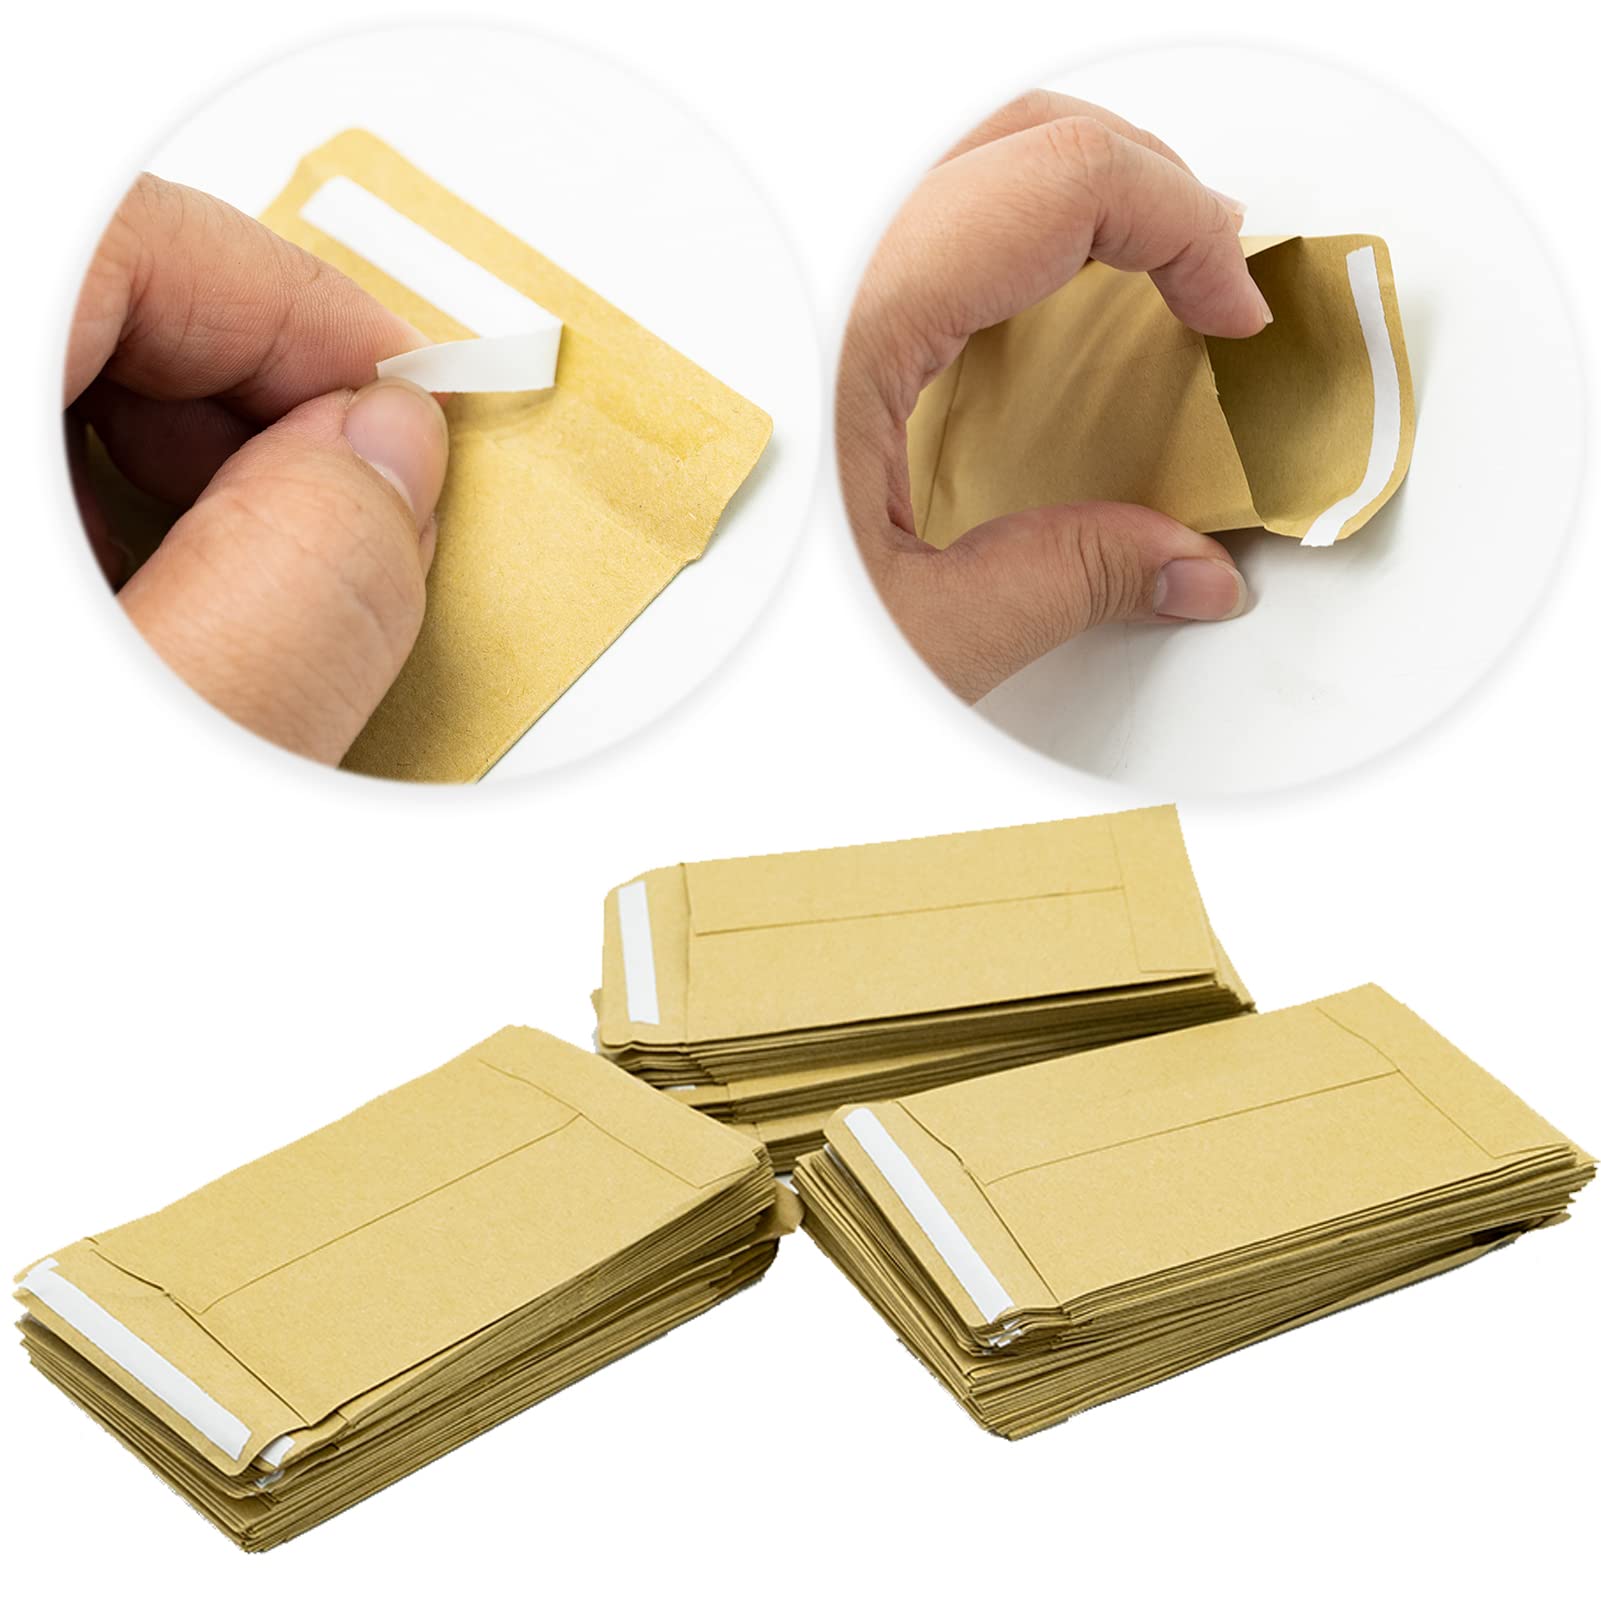 SZXMDKH 150 Pcs Small Seed Envelopes, Self-Adhesive Mini Brown Envelopes Kraft Paper Money Envelope Small Items Coins Stamps Cards Seeds 9 x 6 cm (3.54 x 2.36 inch), Yellow kraft paper (npzxf0150)